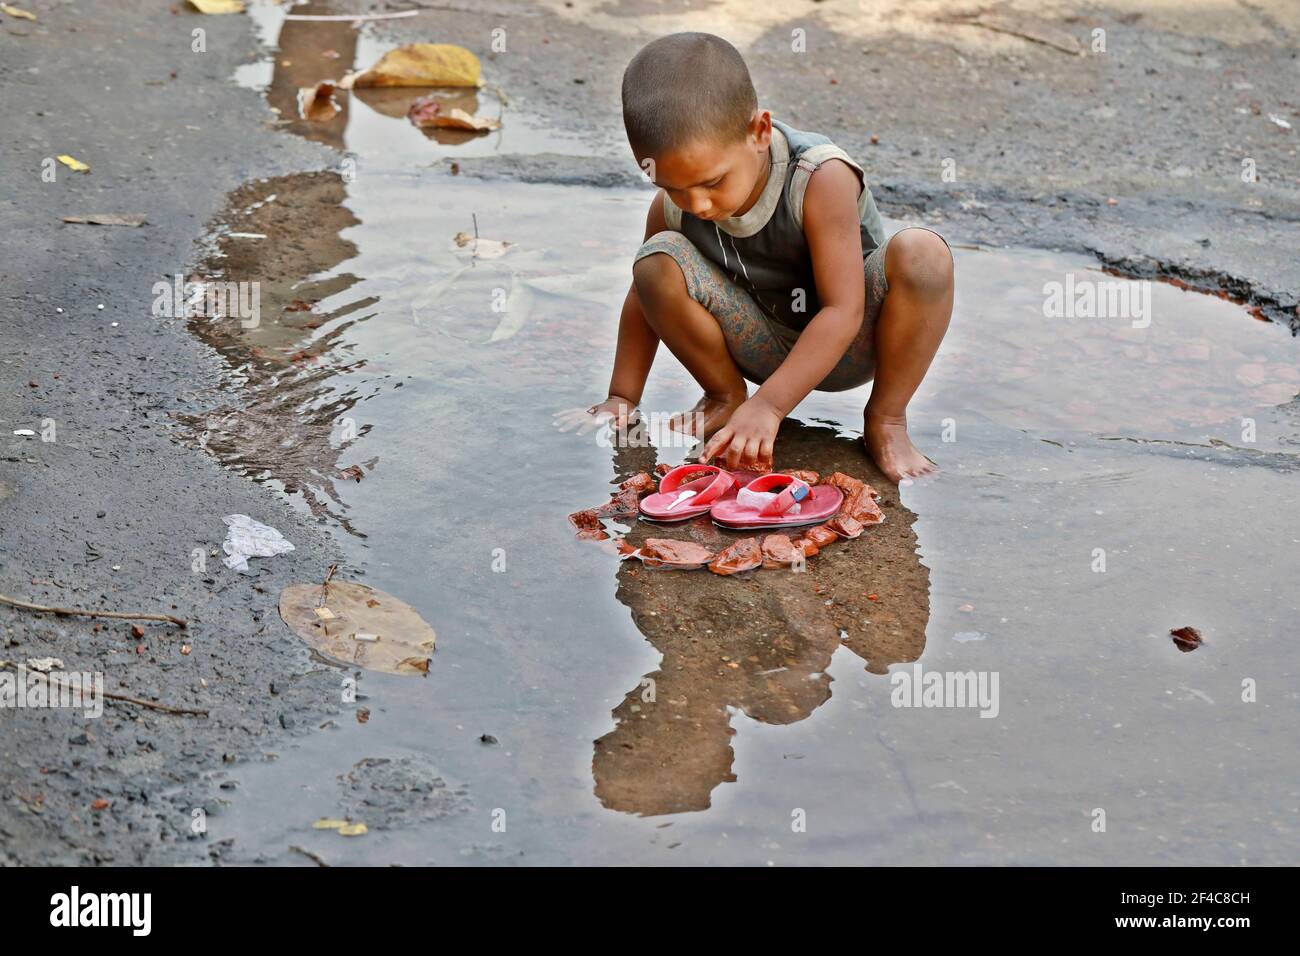 Dhaka, Bangladesh - March 20, 2021: A street child is playing in the frozen water in the Dhaka University area, Dhaka, Bangladesh. Stock Photo